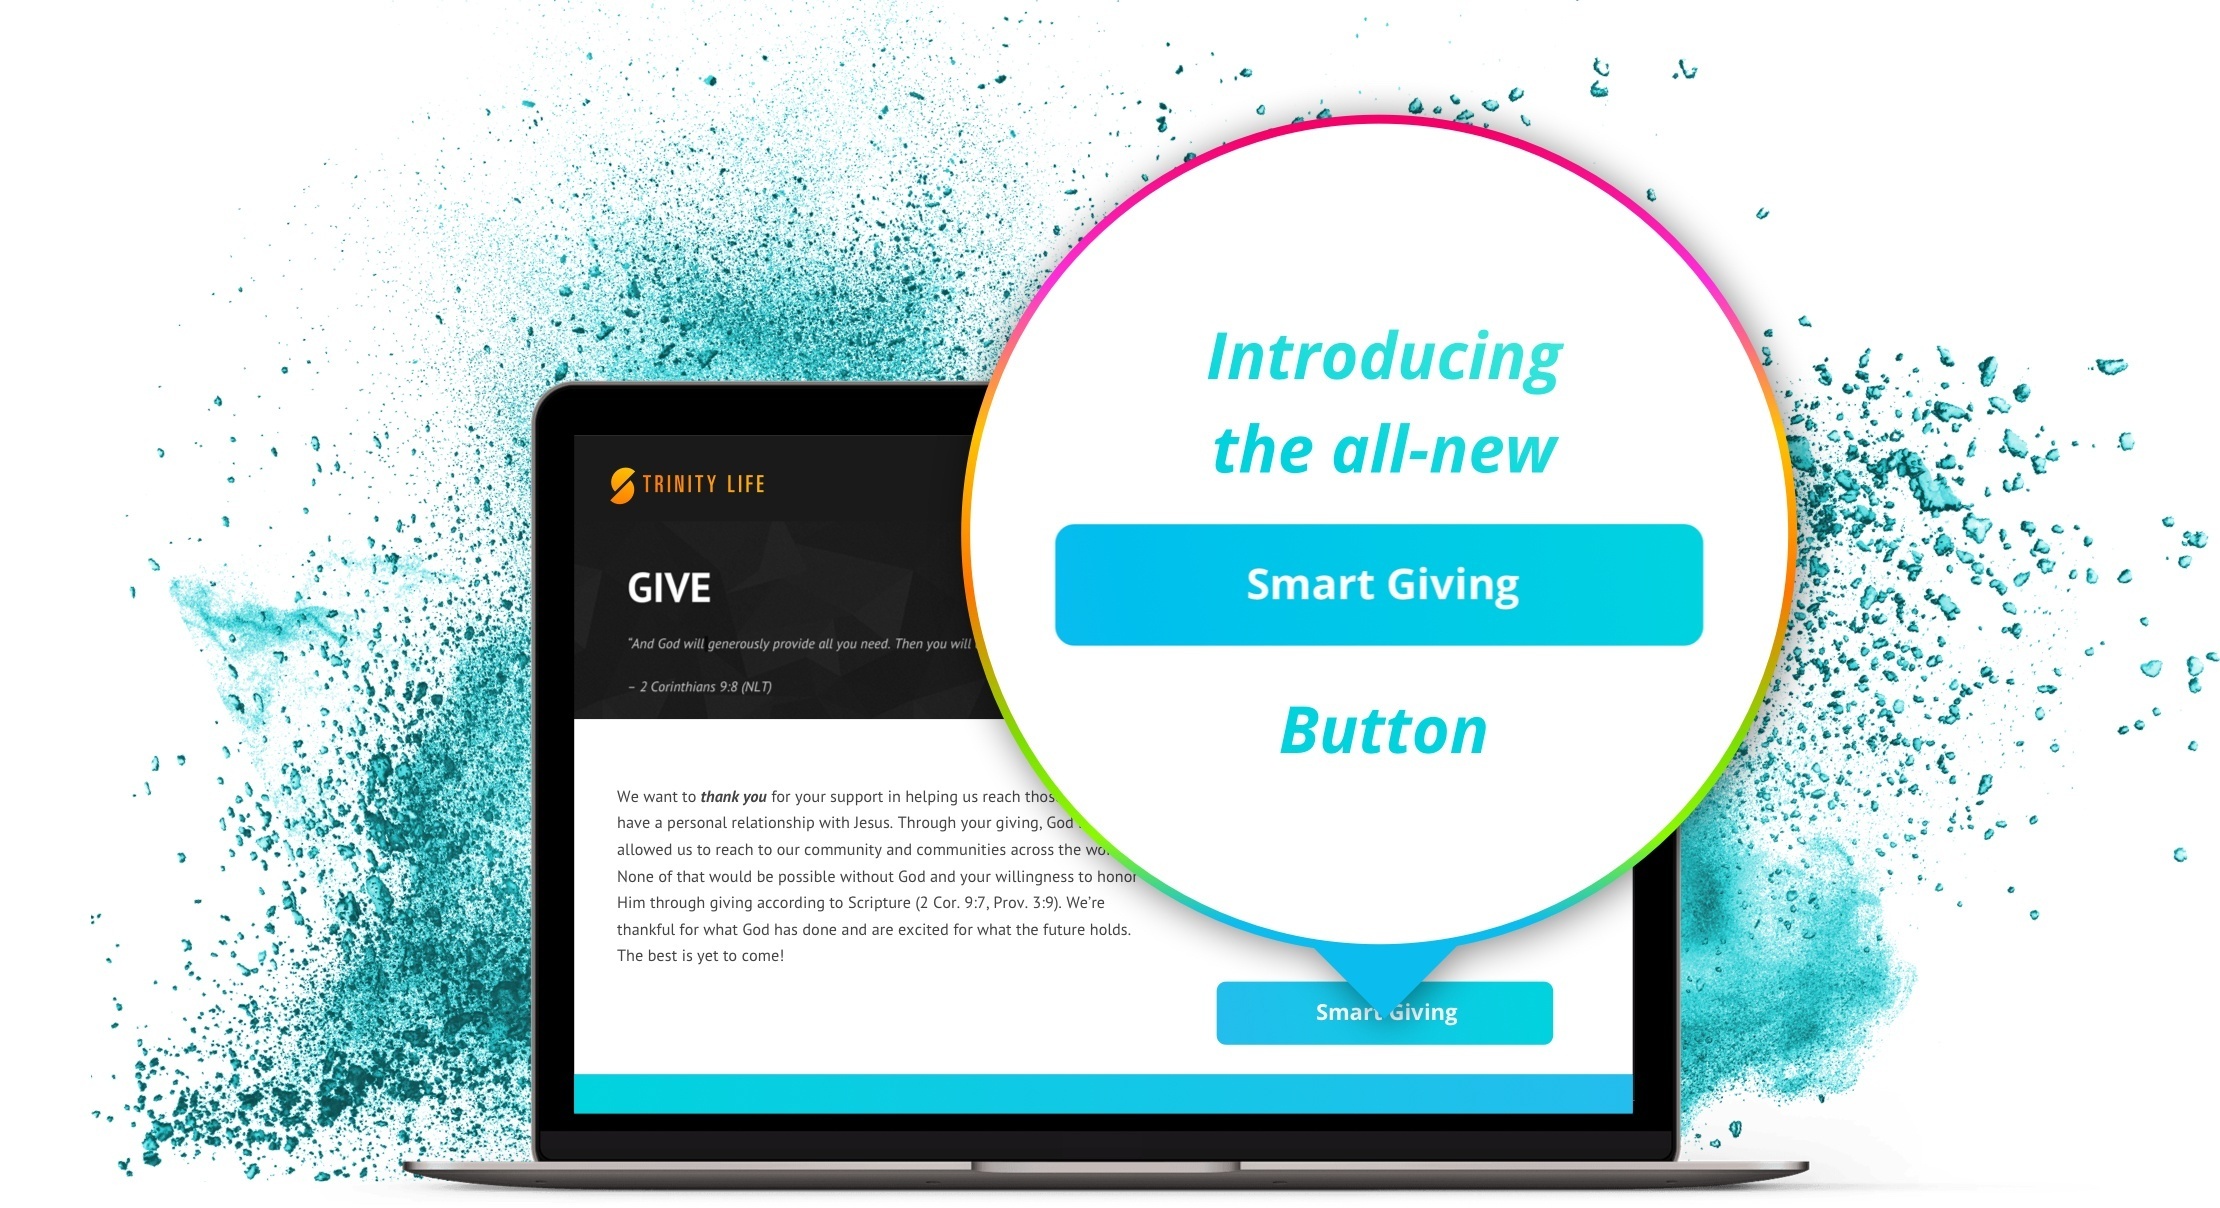 Now churches can give online through the Smart Giving Button!